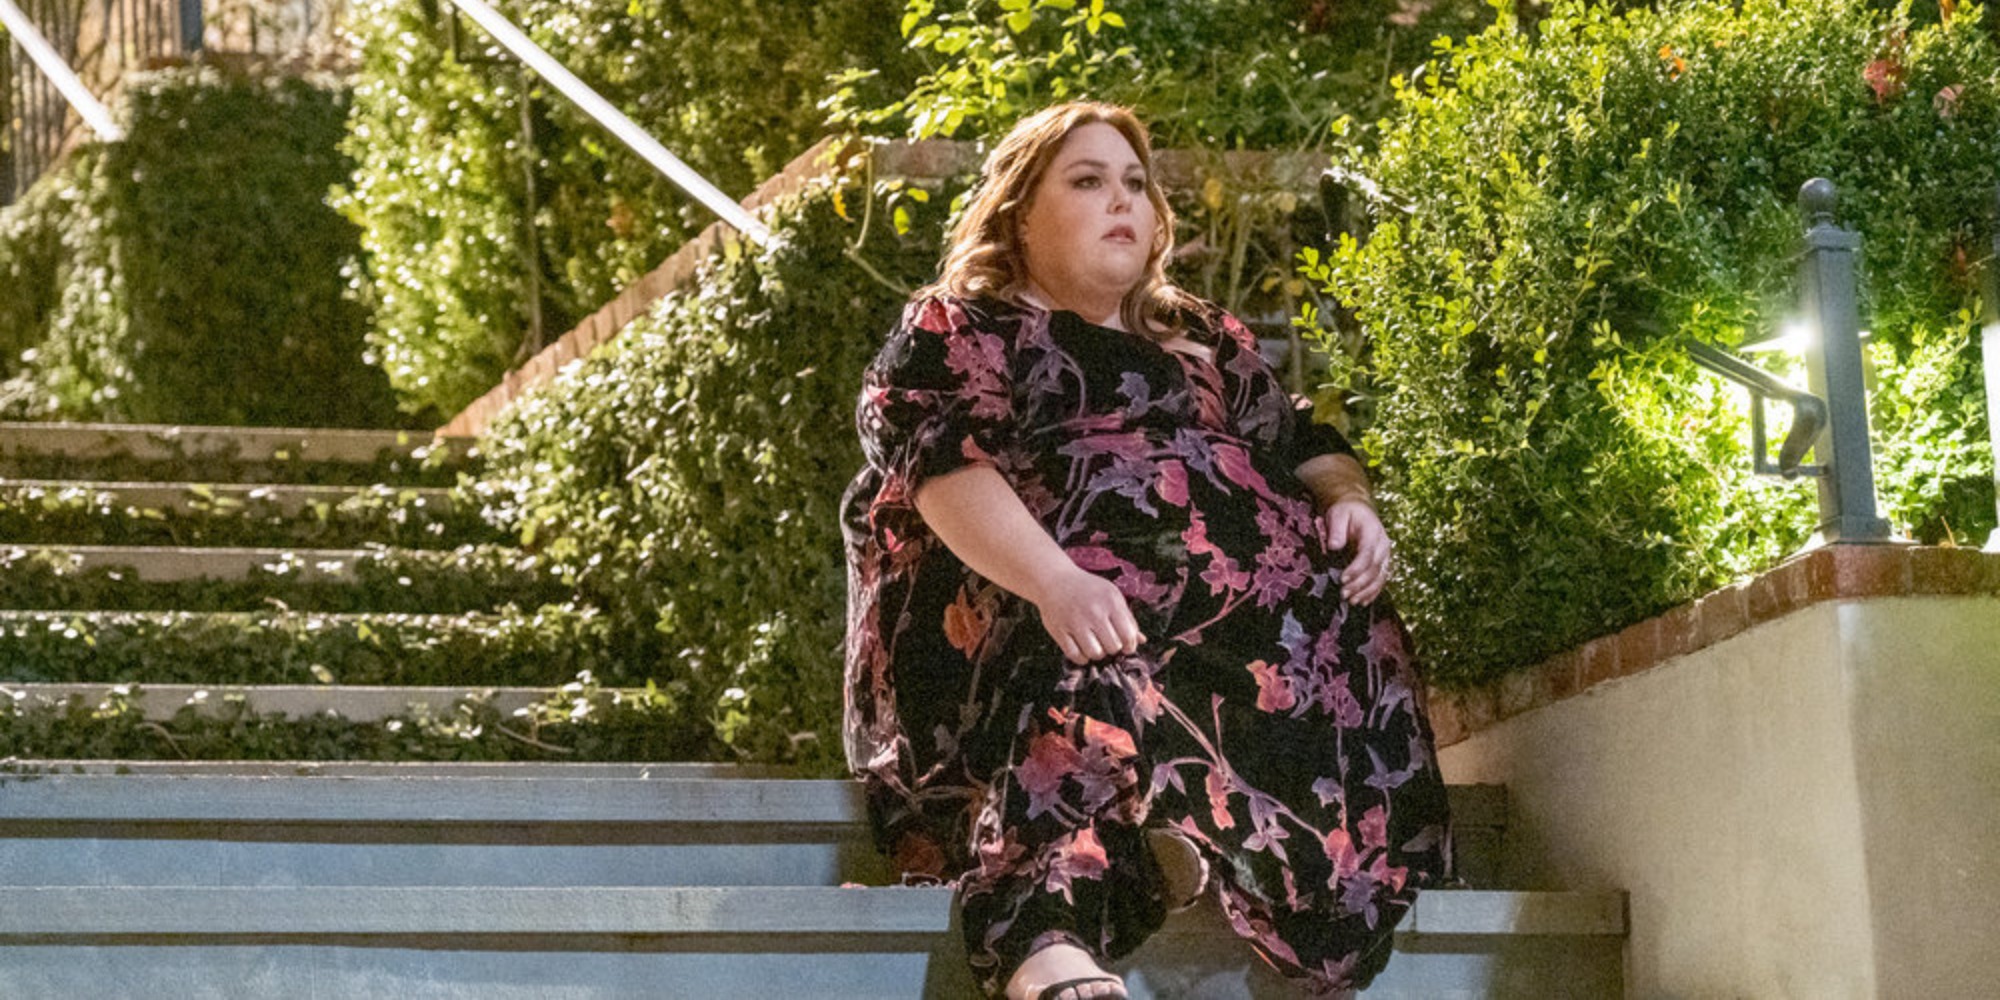 Chrissy Metz on the set of This Is Us.